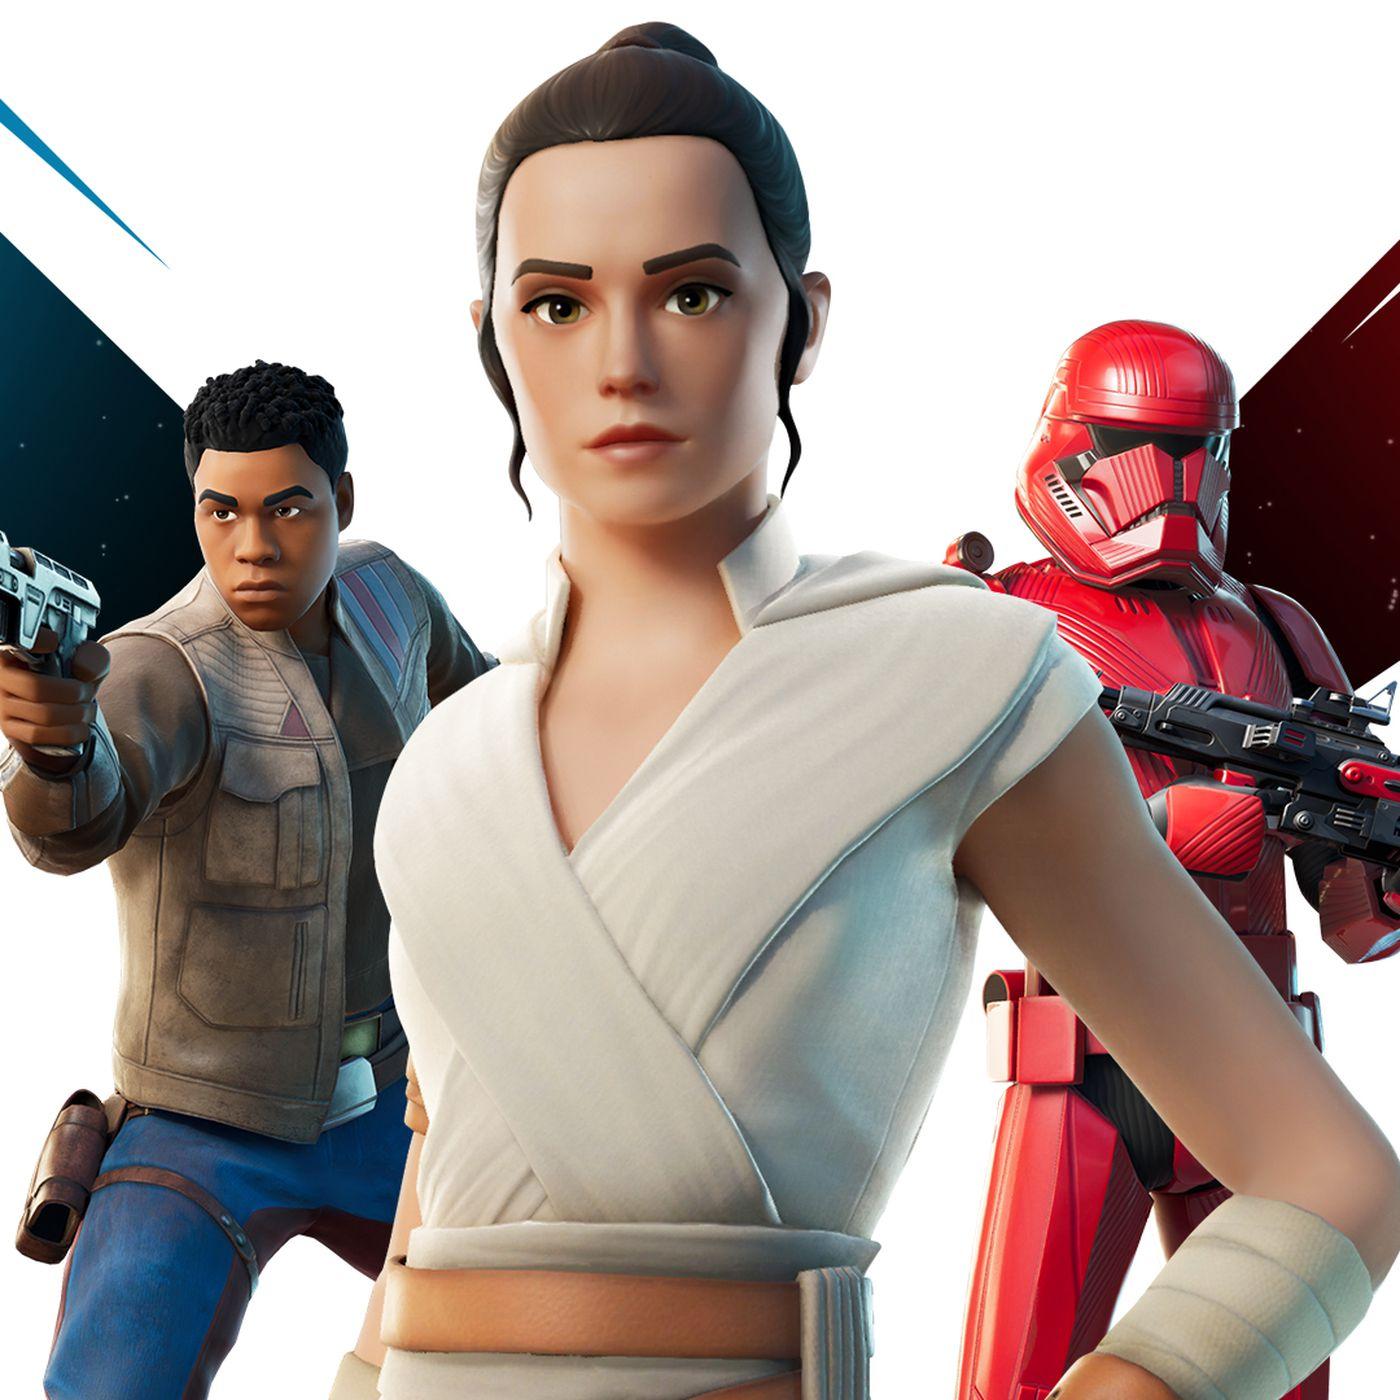 Fortnite adds Rey and Finn skins in time for Star Wars